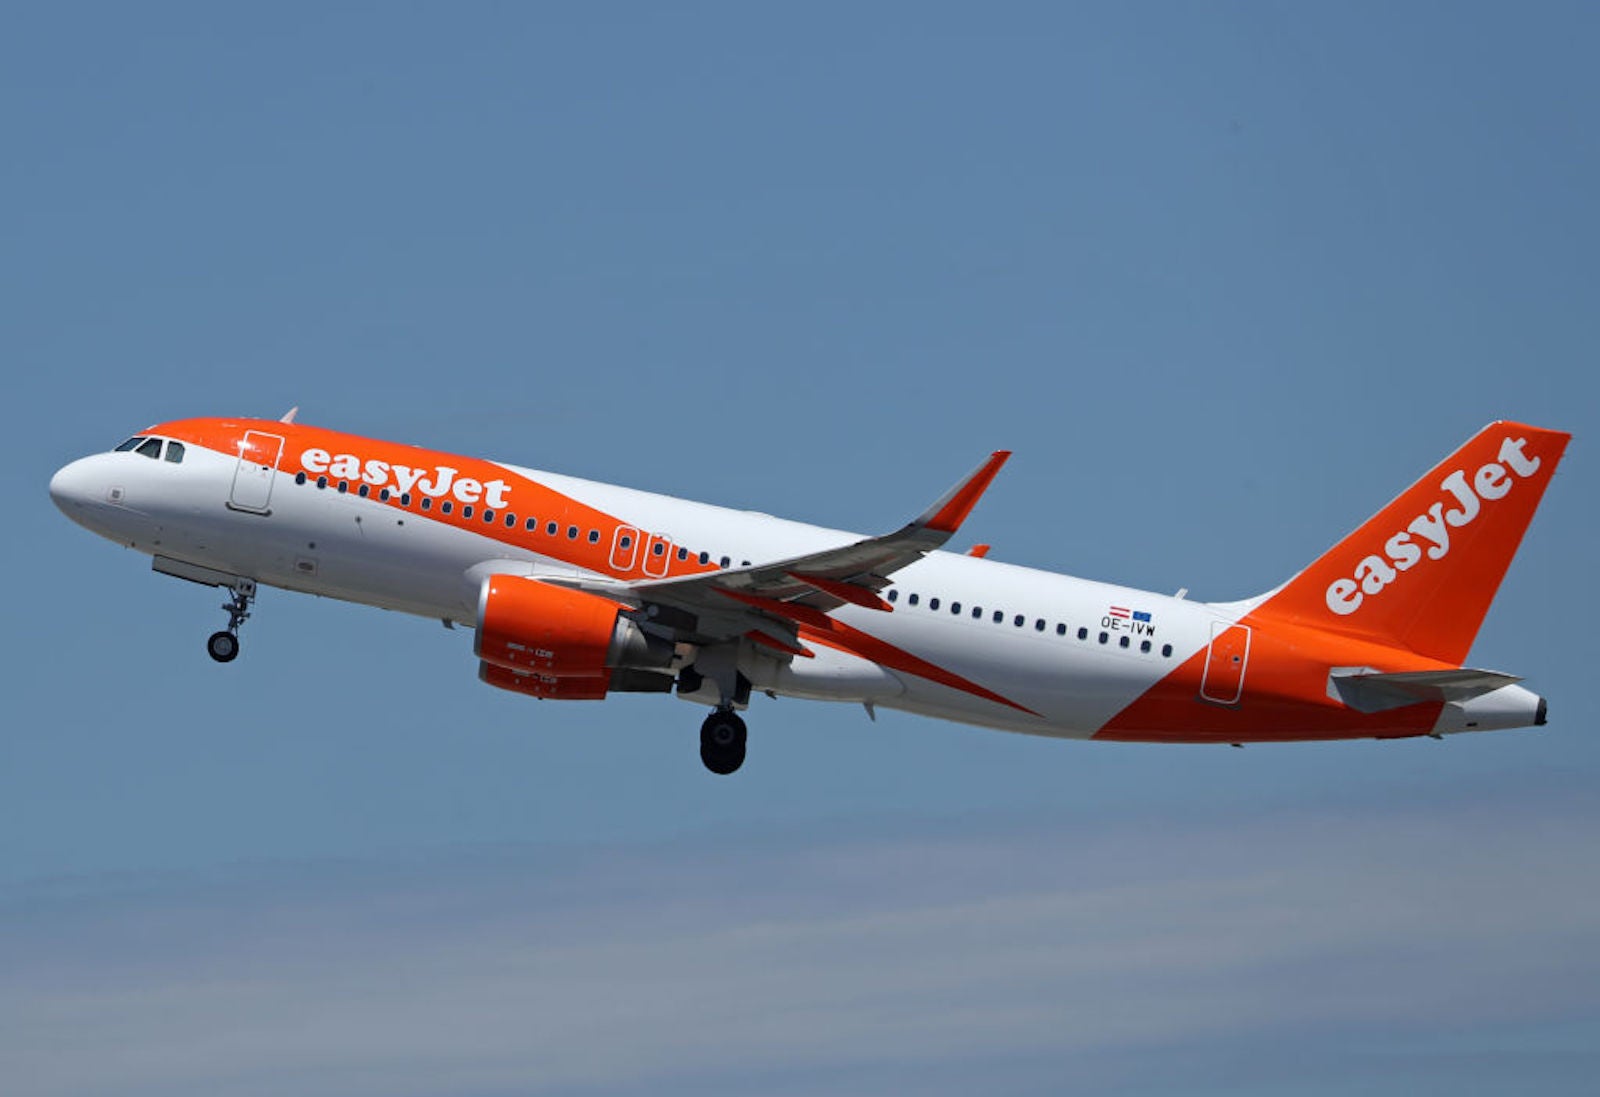 When are the easyJet strikes, which flights could be affected and can you claim compensation? - The Points Guy UK